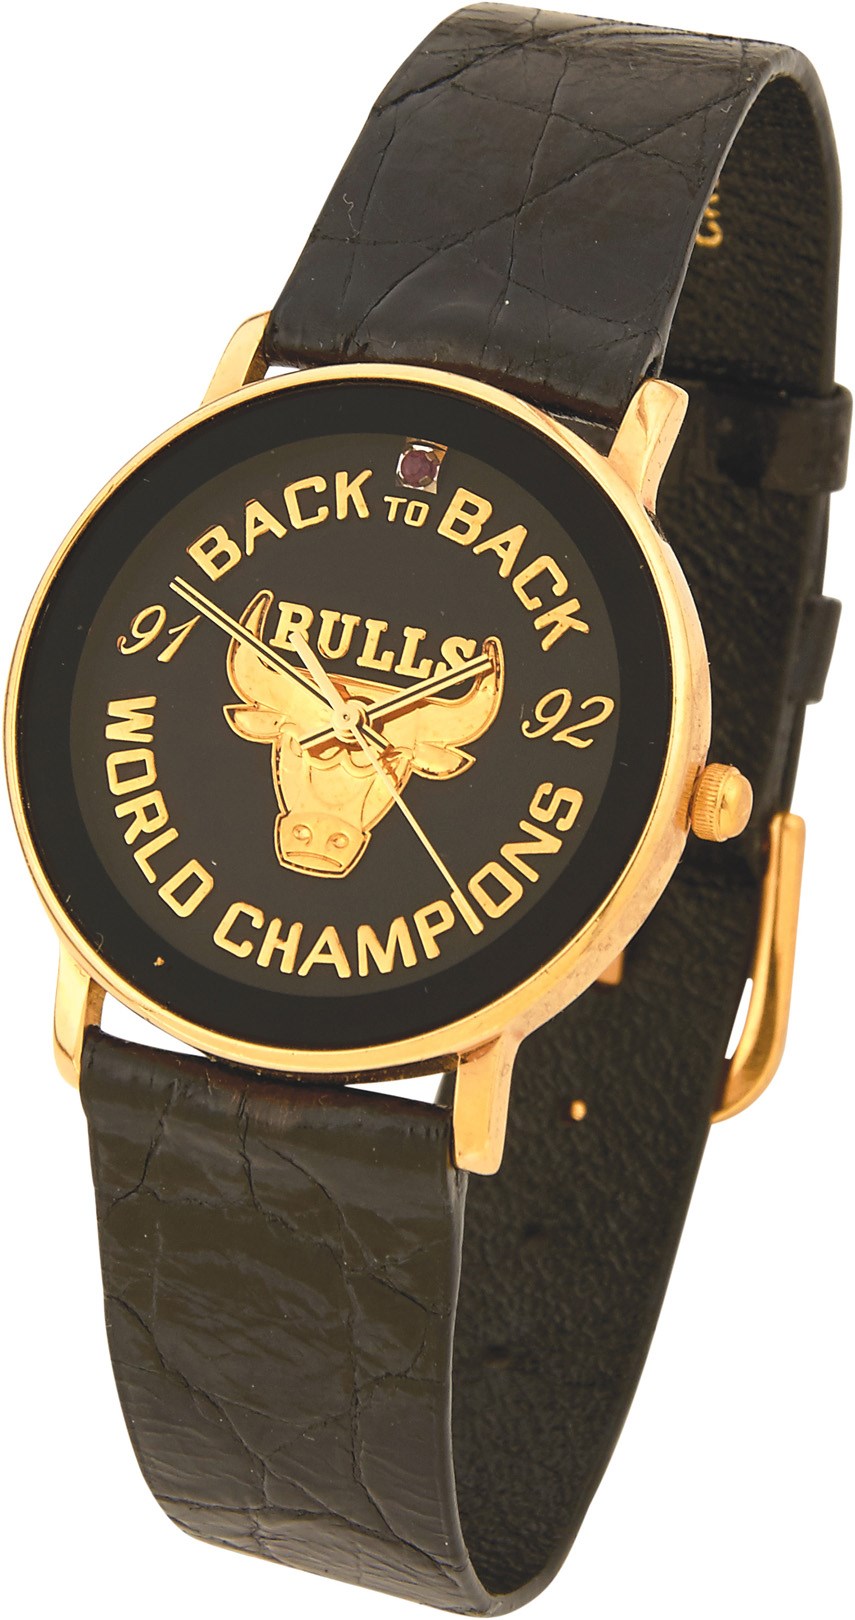 1991-92 Horace Grant Chicago Bulls Back to Back Championship Watch